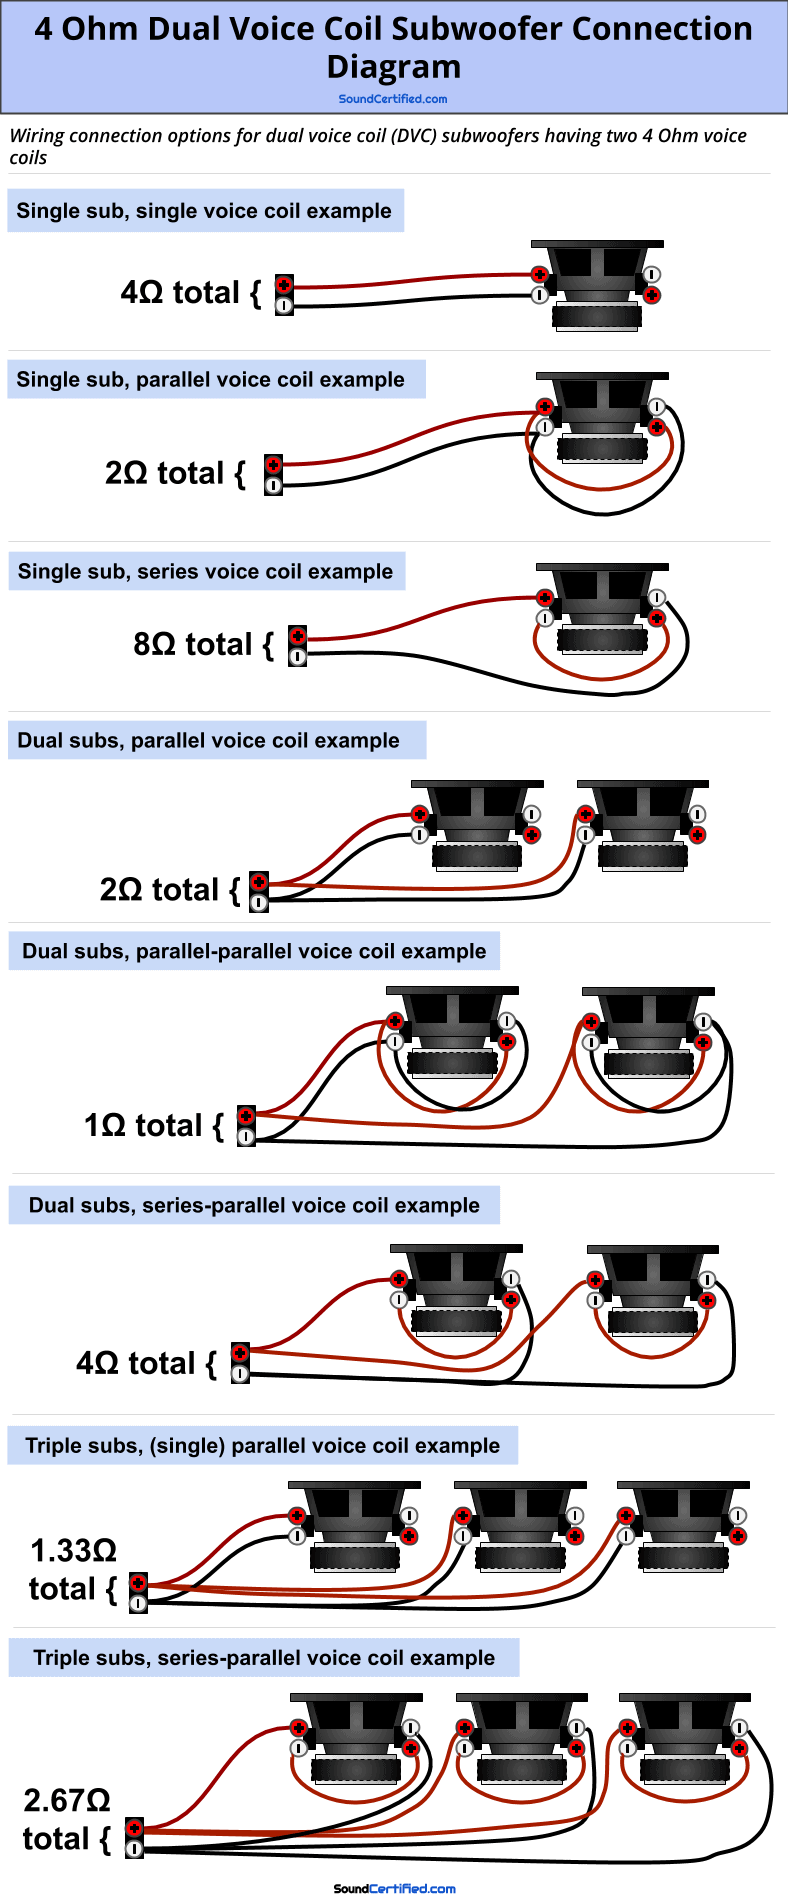 4 Ohm dual voice coil subwoofer wiring diagram